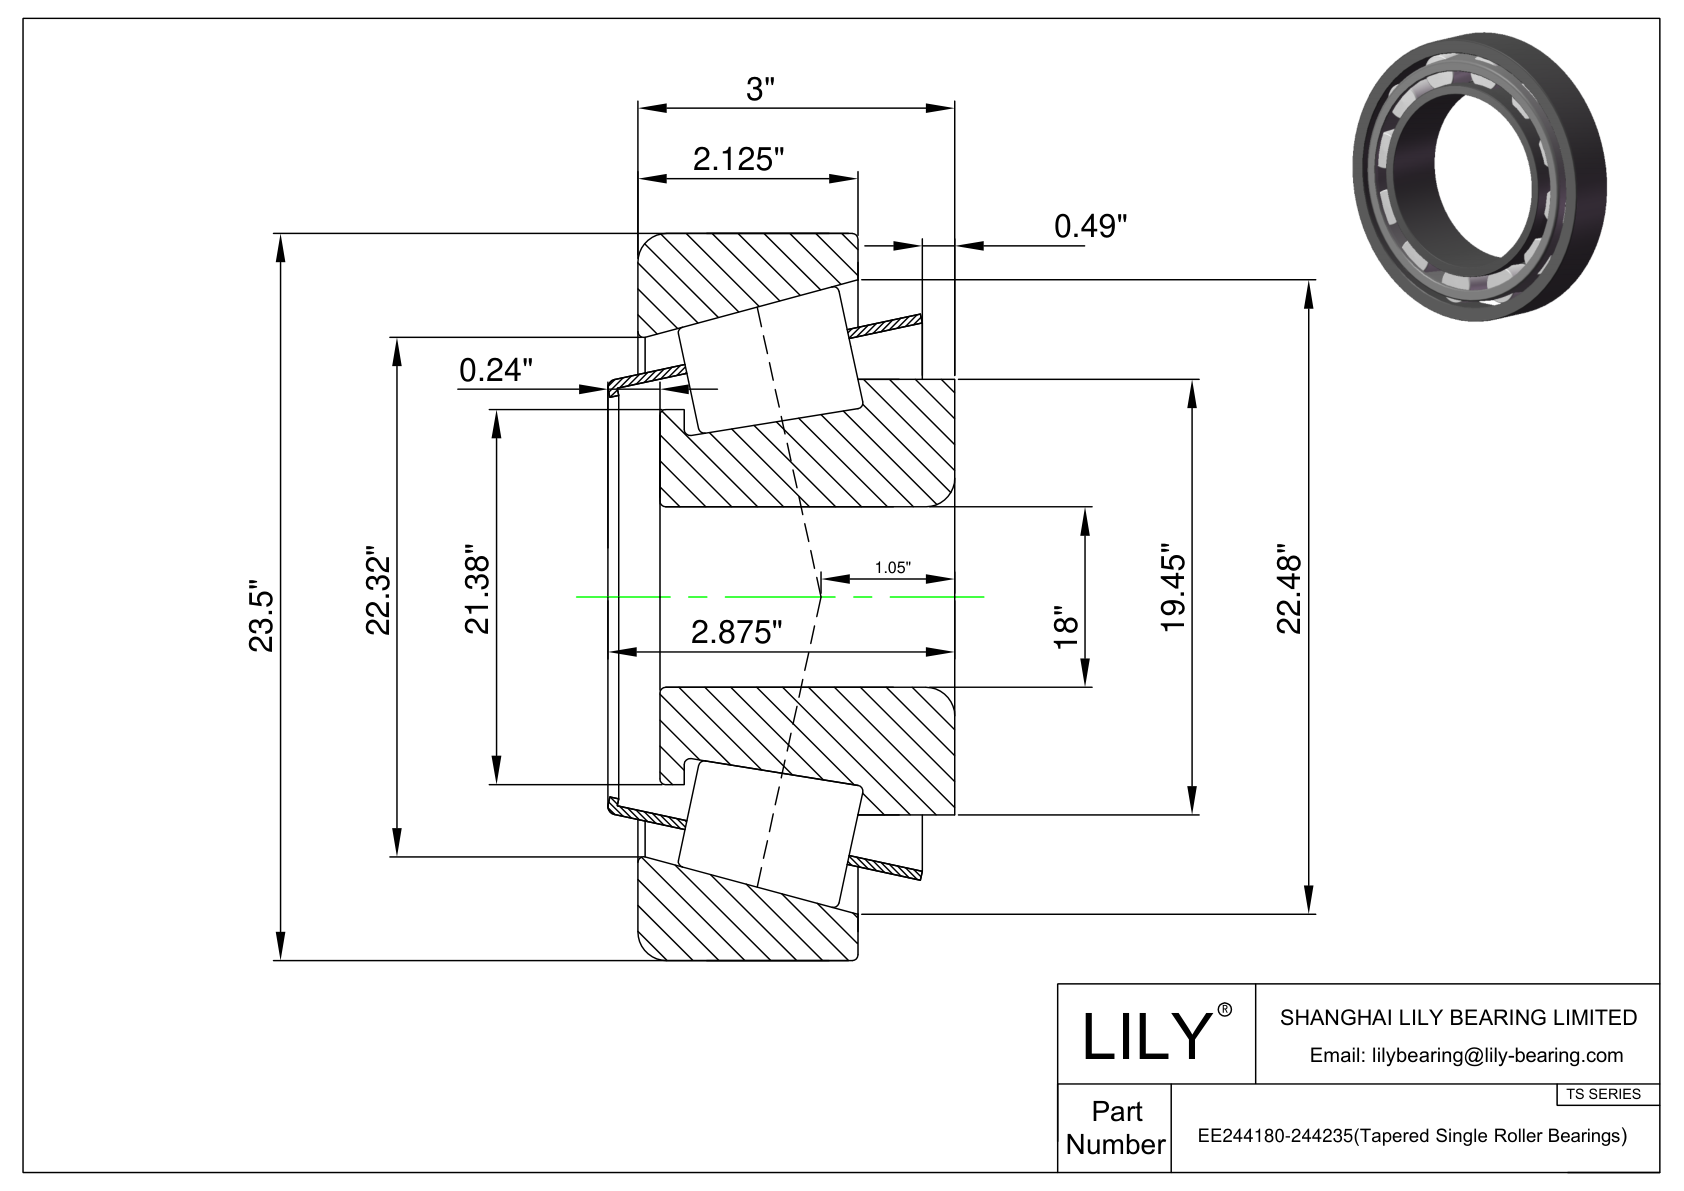 EE244180-244235 TS (Tapered Single Roller Bearings) (Imperial) cad drawing